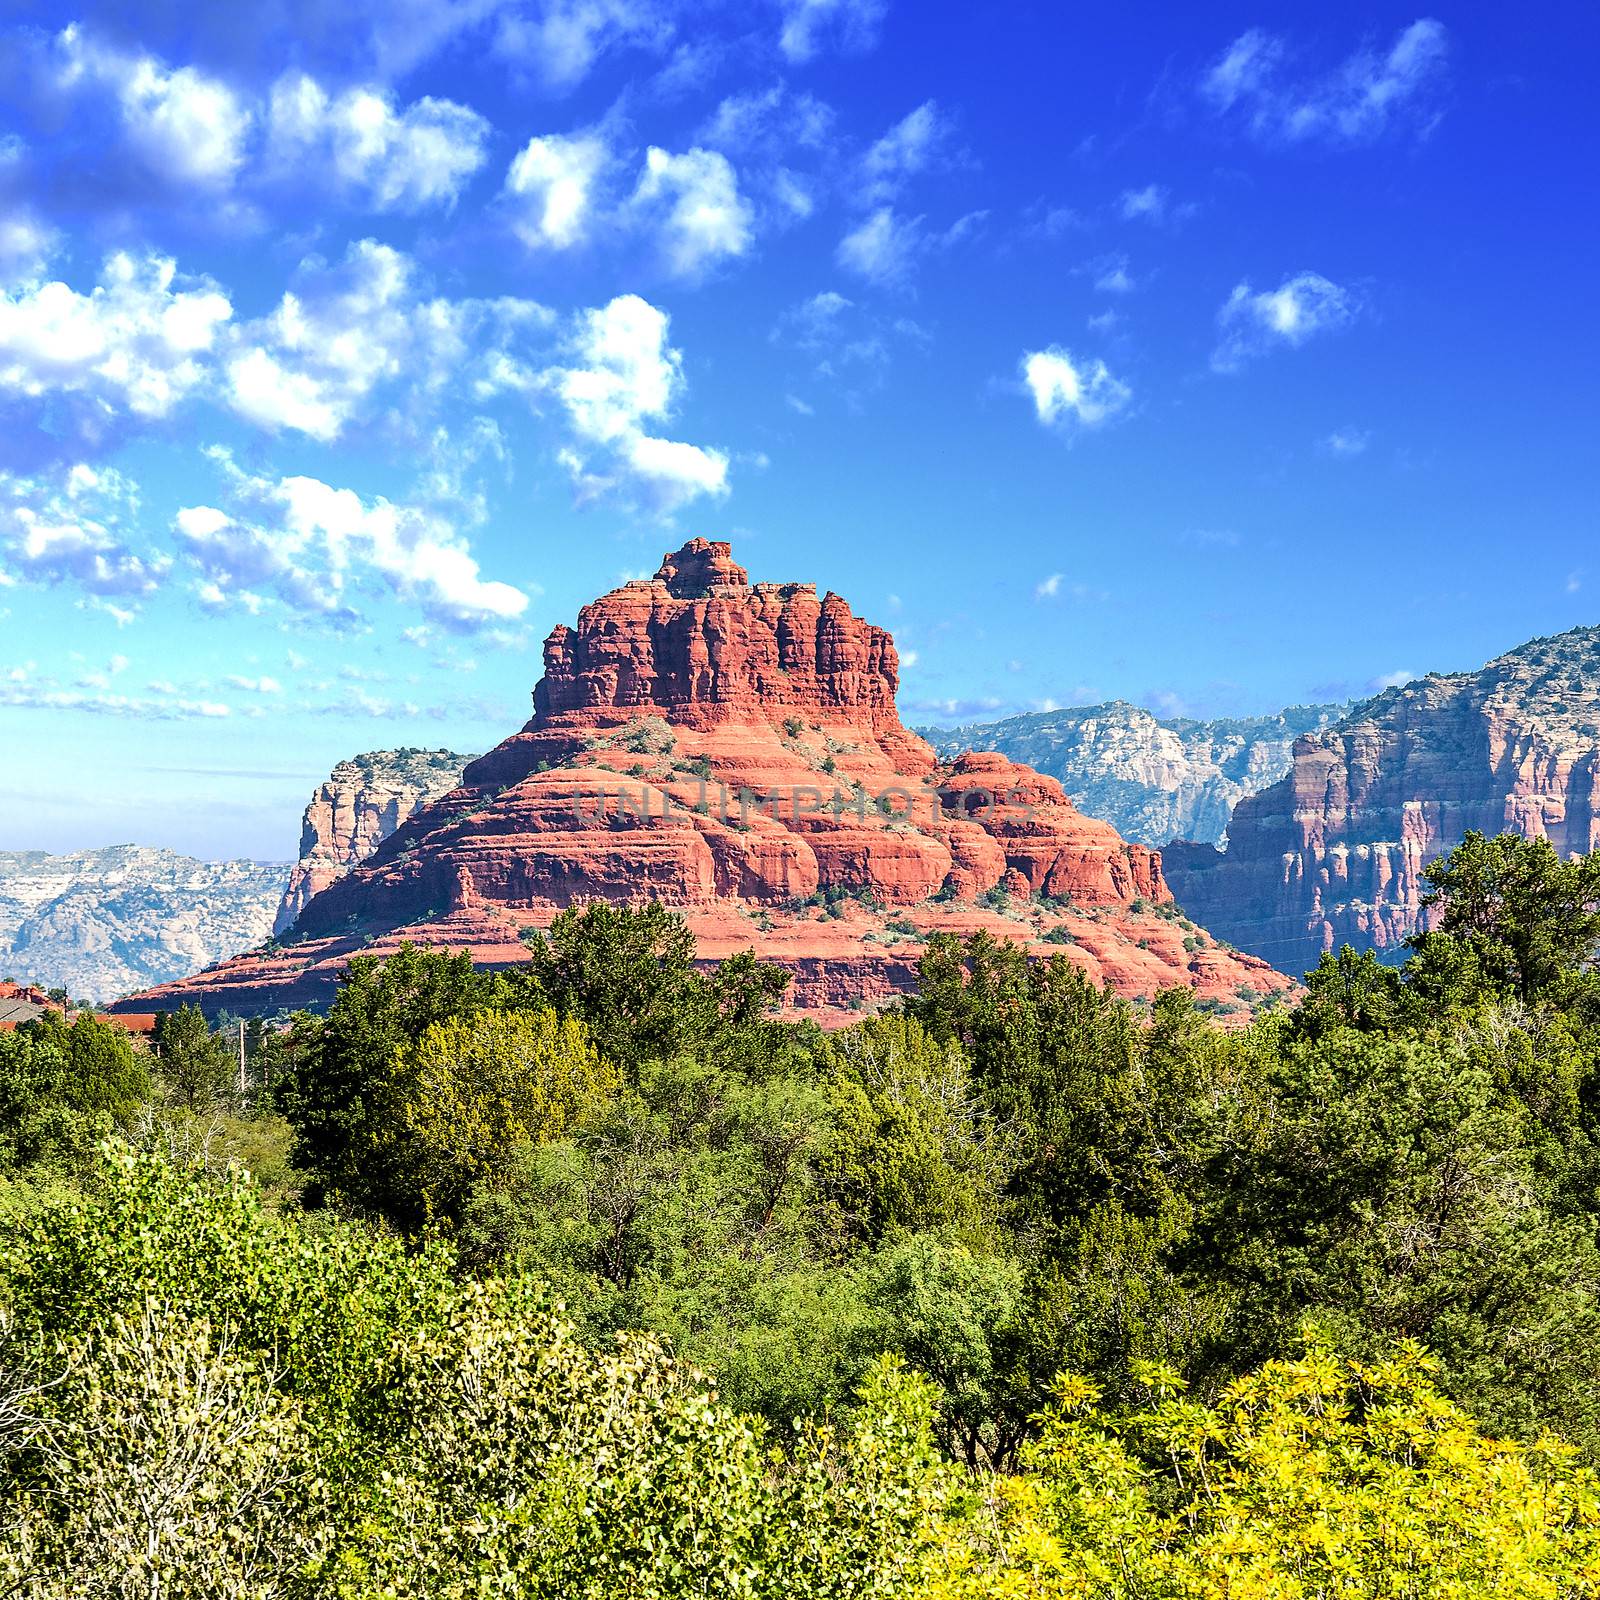 famous bell rock and Courthouse Butte in Sedona, Arizona, USA